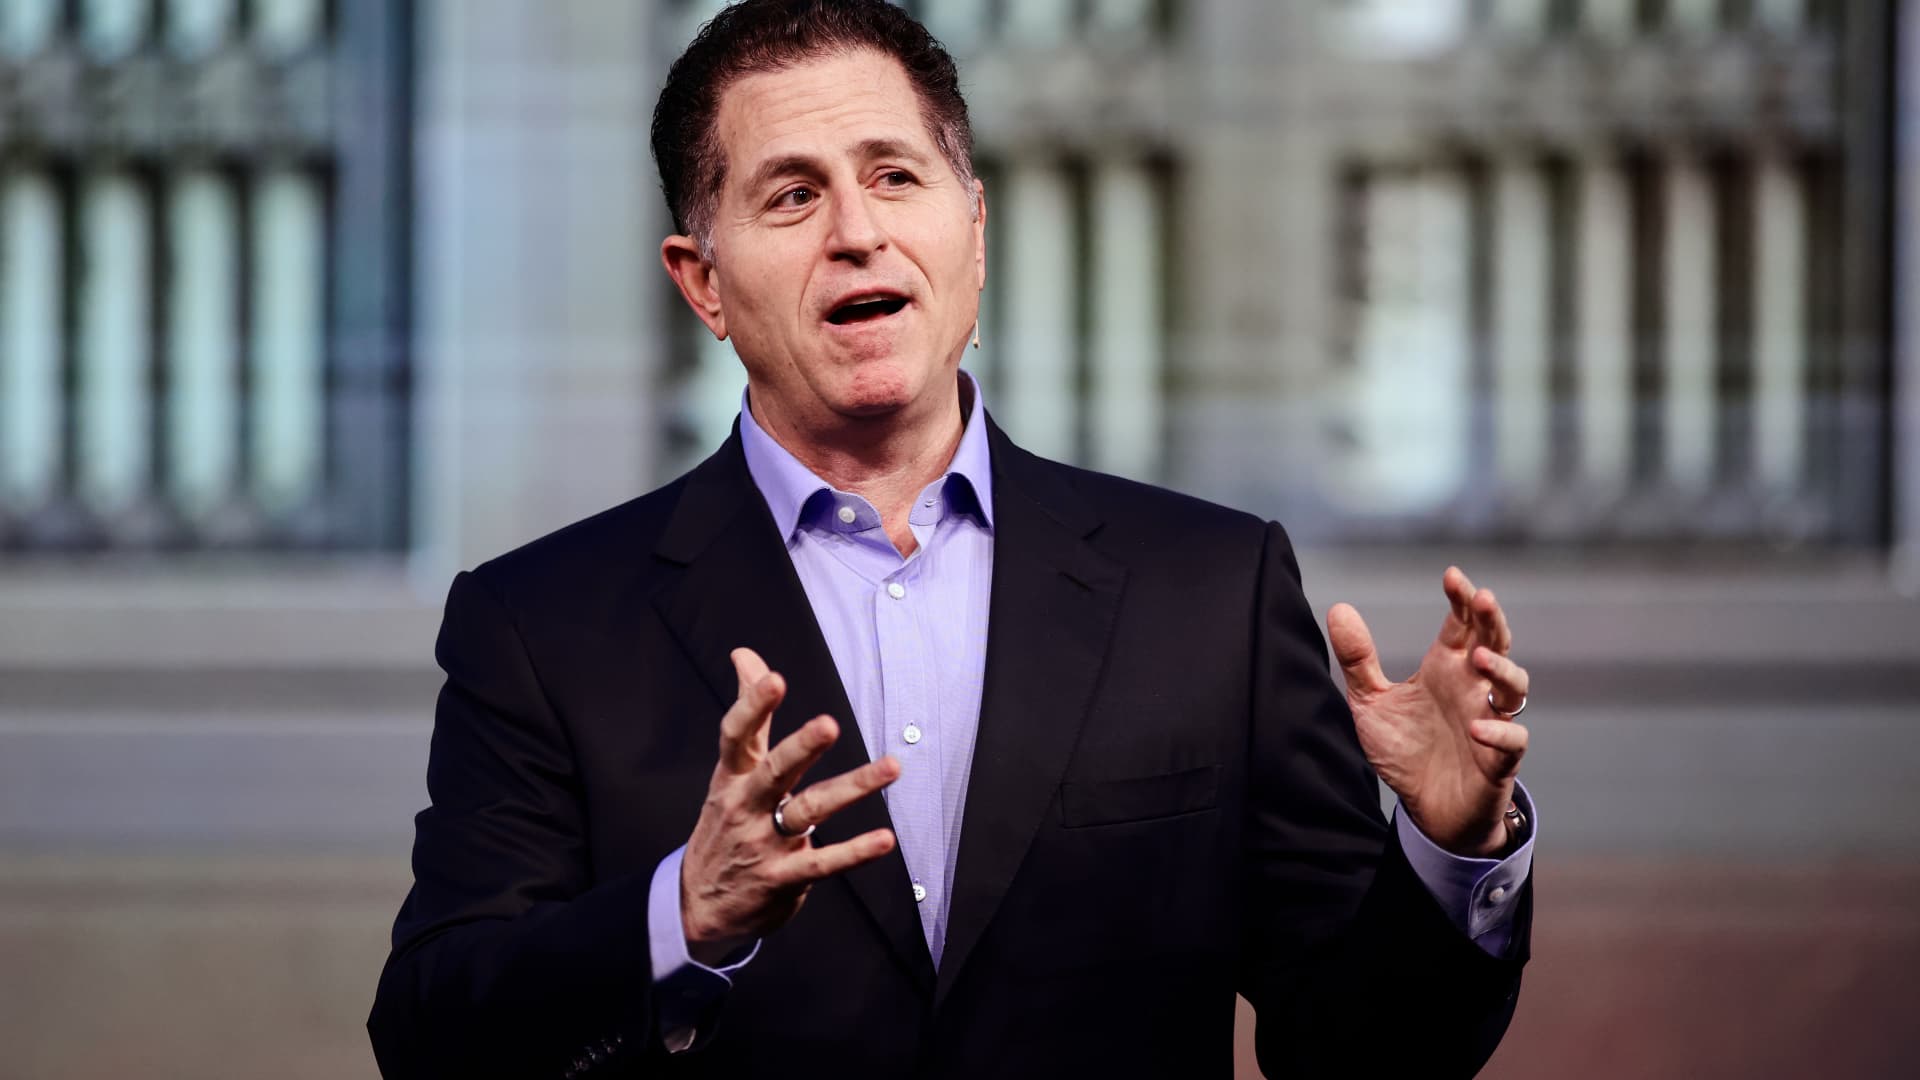 Dell stock surges on optimism it has big AI server orders [Video]